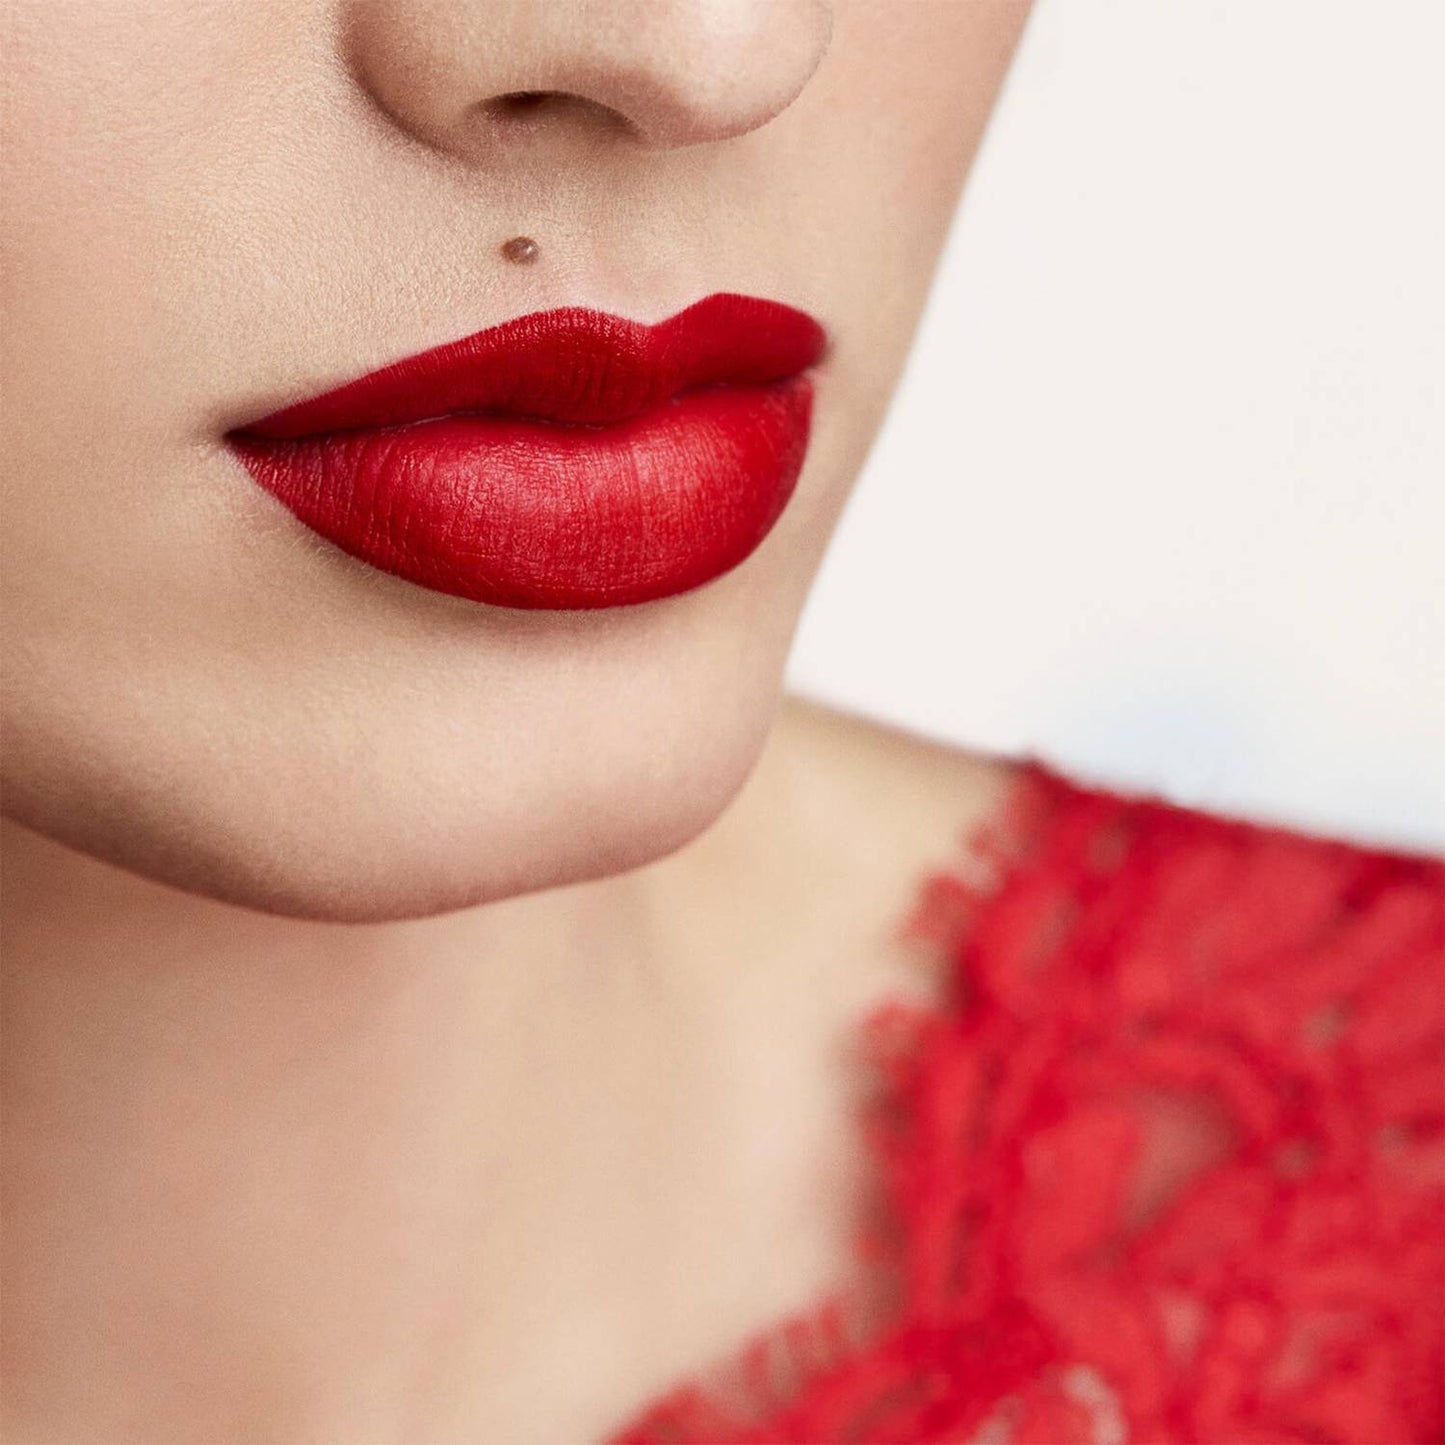 Dolce&Gabbana The Only One Matte Lipstick in the shade DGAmore 3.5g